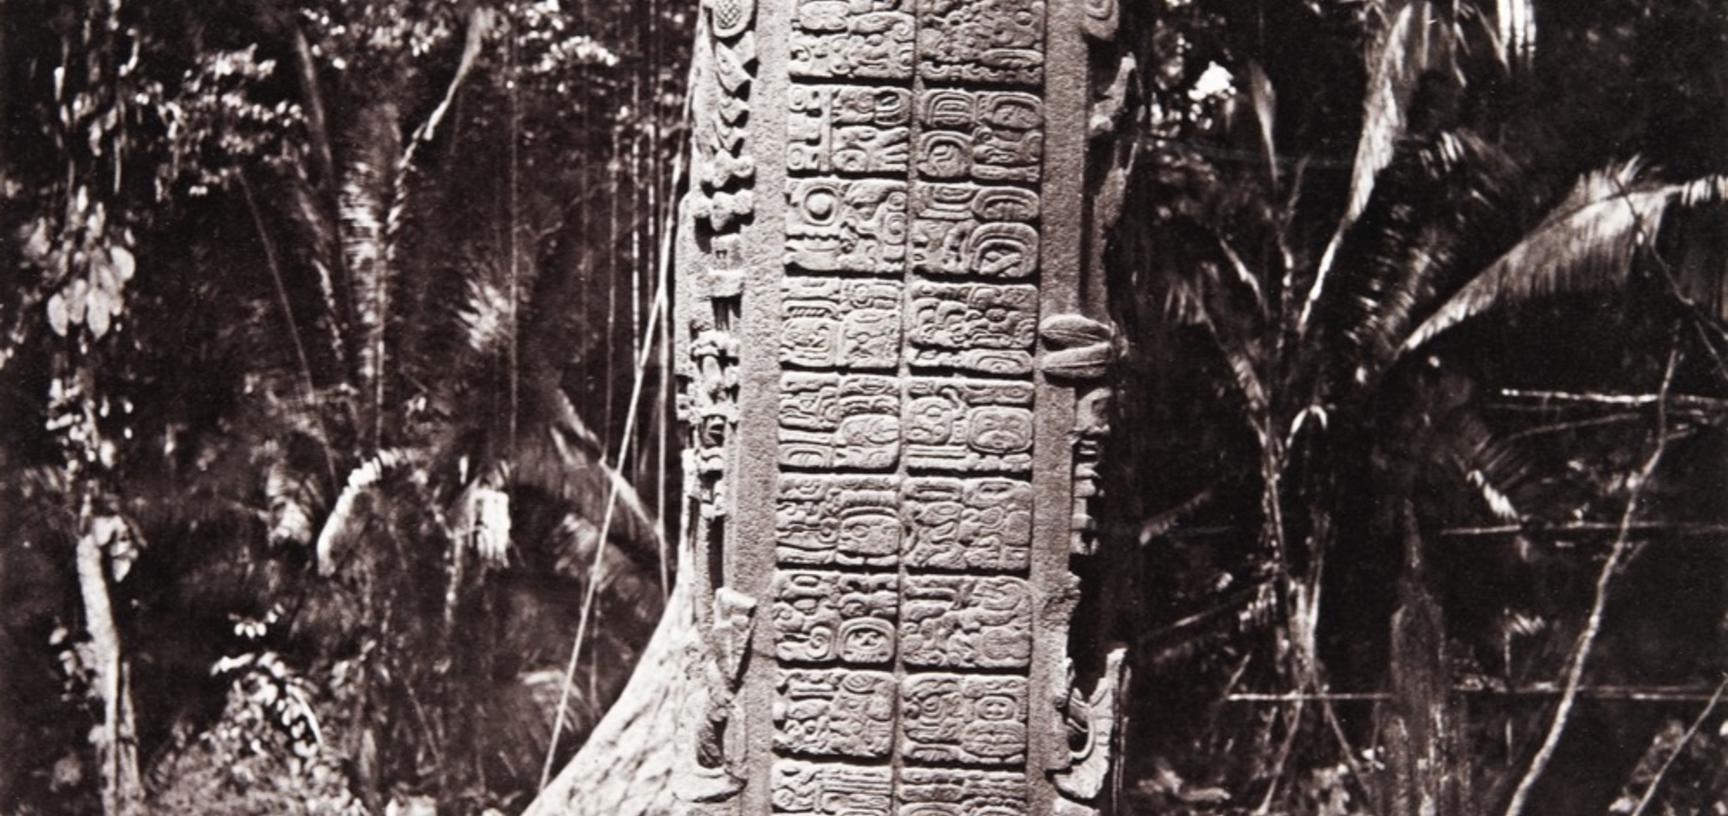 Stela F (also known as Monument 6), east side, dated AD 761. ‘This is the most graceful and most elaborately decorated of all the Quirigua stelae’, Alfred Maudslay wrote of Stela F. ‘The graceful arrangement of the feather-work on the upper part of this m